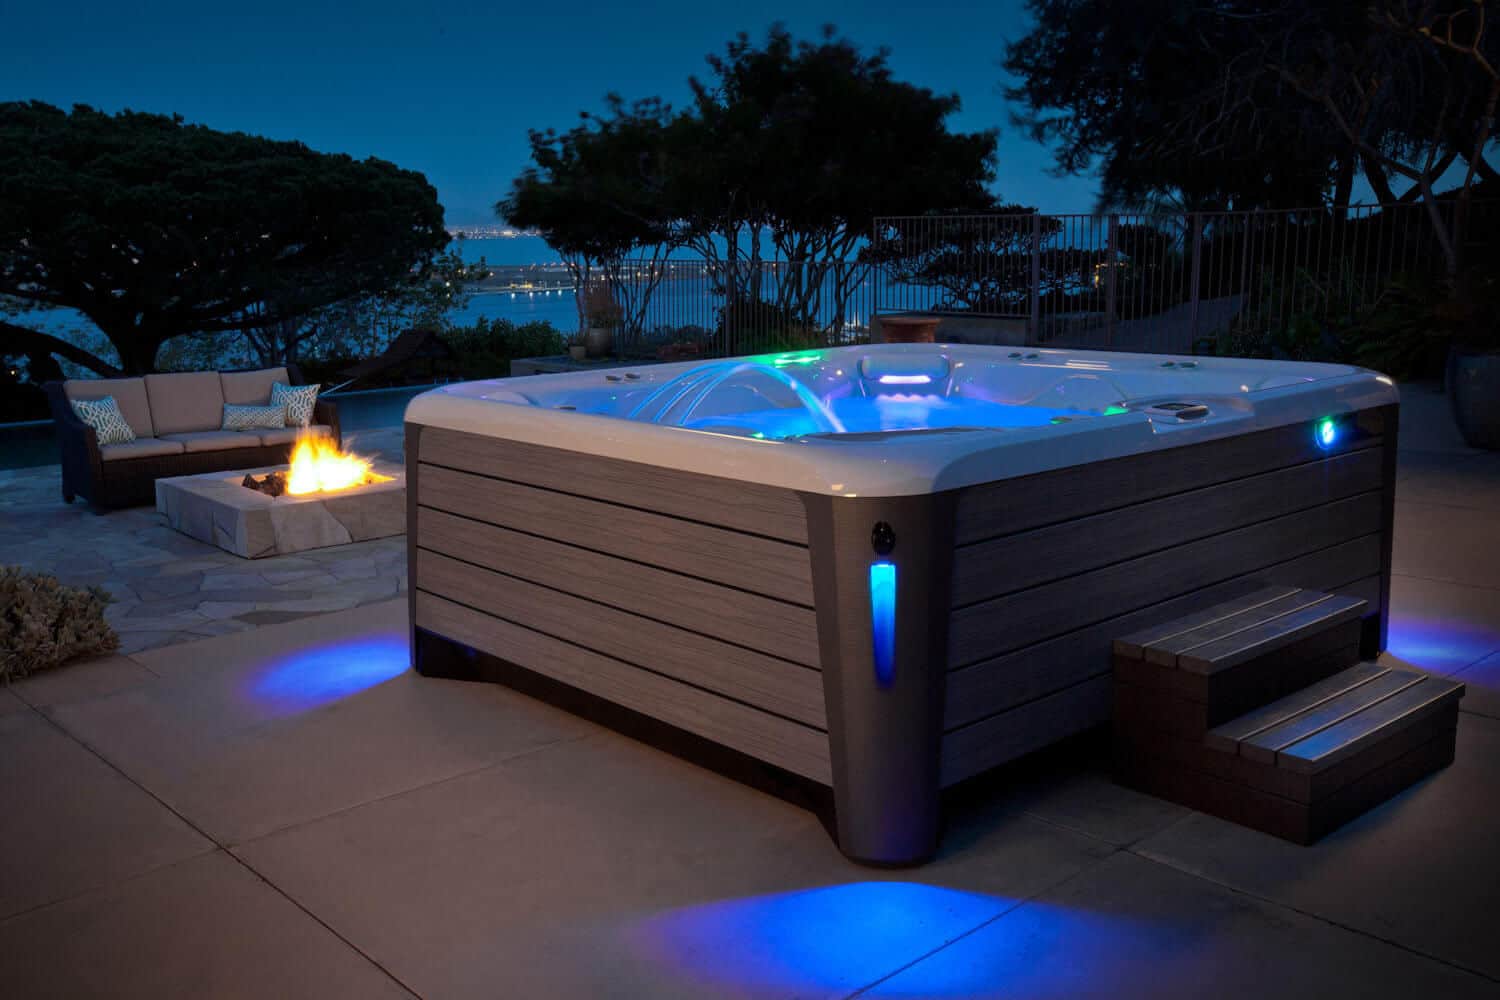 Salt Water Sanitation Systems: The Pros and Cons of Salt Water Hot Tubs -  Hot Spring Spas